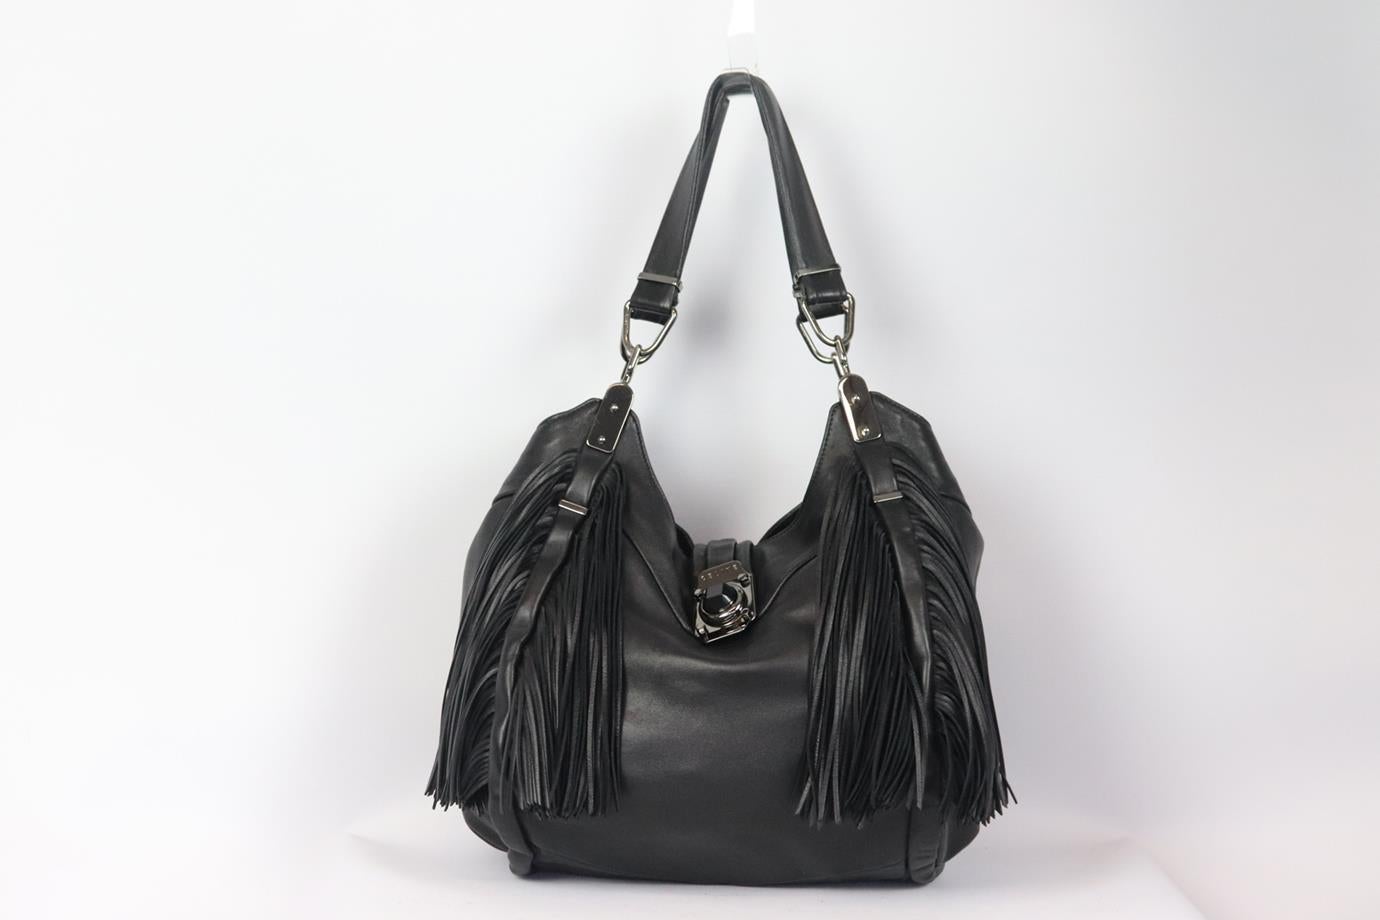 Celine Dimitri fringed leather shoulder bag. Black. Push lock fastening at front. Does not come with dustbag or box. Height: 13 in. Width: 15.5 in. Depth: 5.5 in. Handle Drop: 9.5 in. Very good condition - Light wear along the edges at base. Some